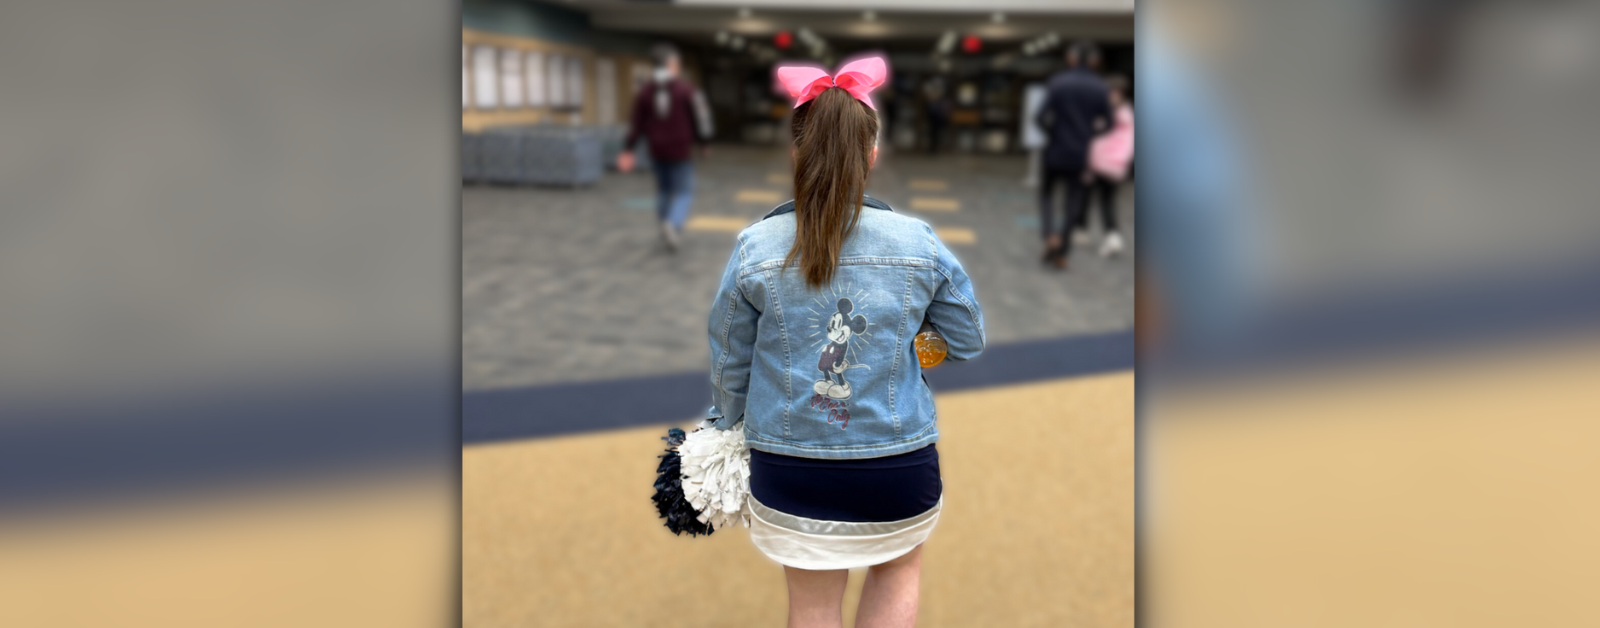 Penny, dressed in her blue and white cheerleading uniform and wearing a jean jacket over it and a pink bow in hair, walks down the school hallway away from the camera